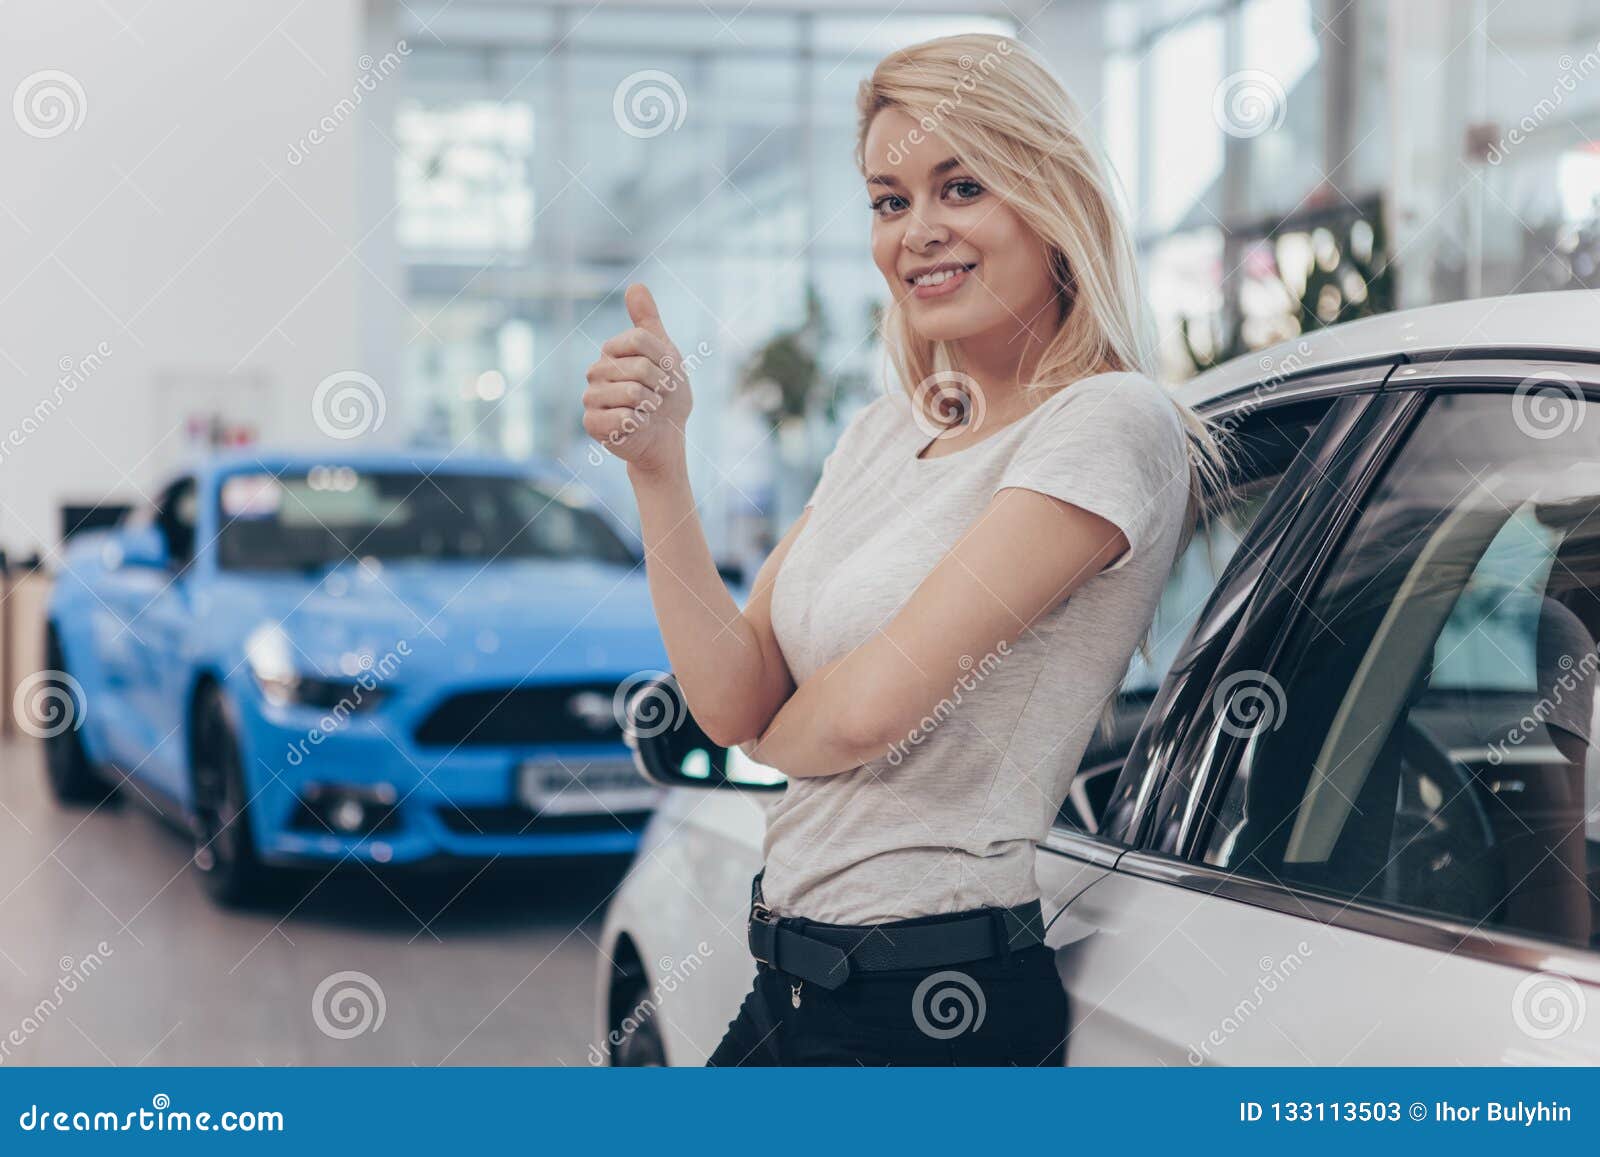 Why Do Dealerships Copy Driver'S License 